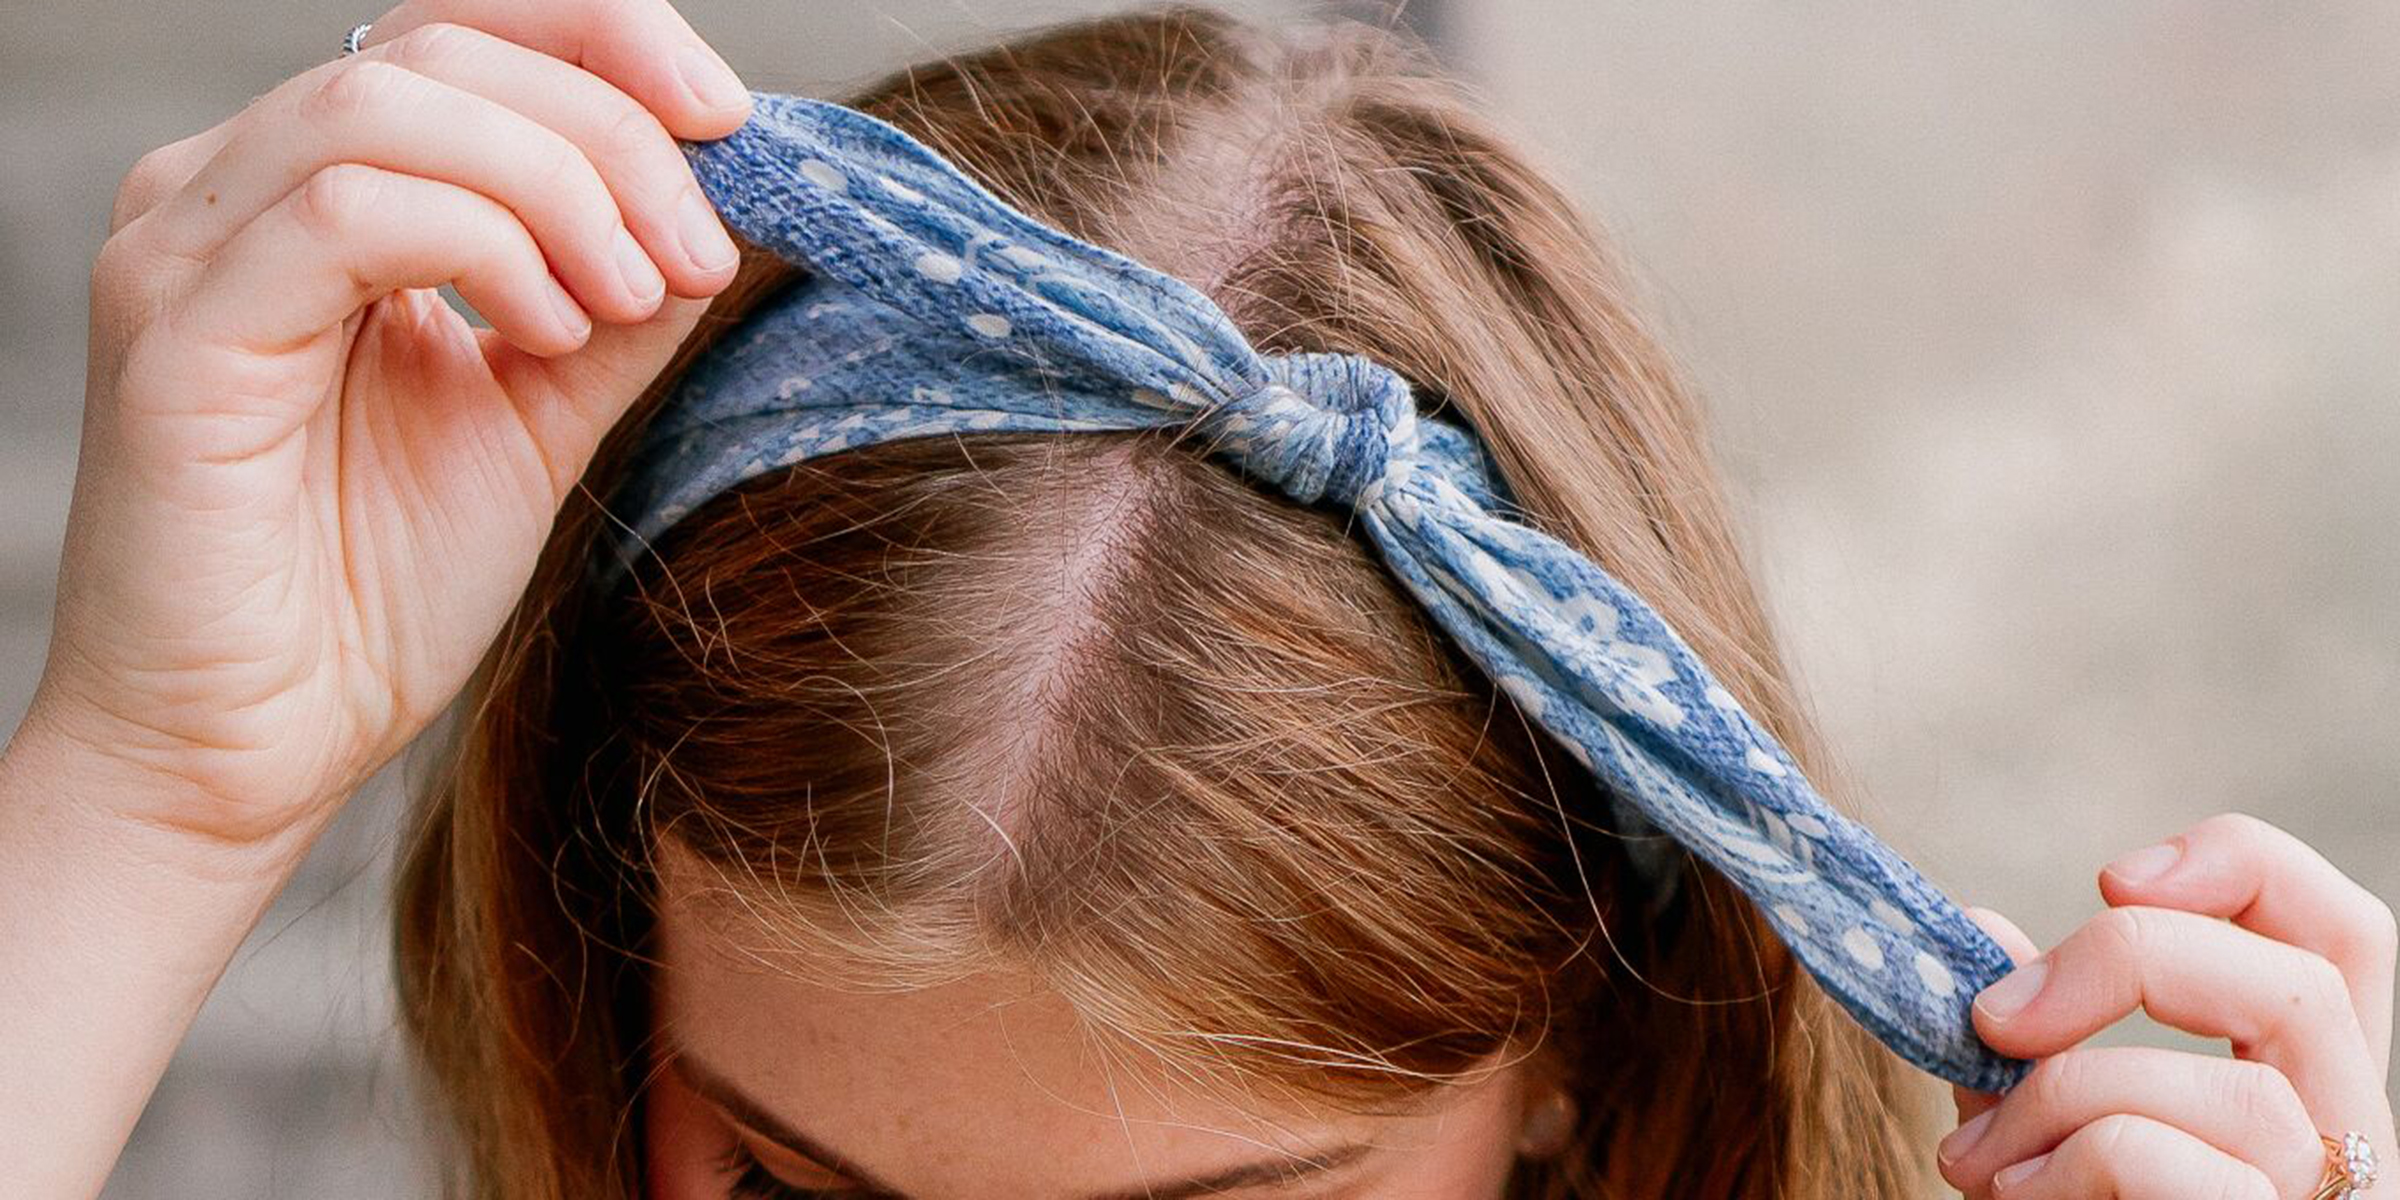 A person tying a denim blue bandana in a knot atop their head, serving as a stylish headband.